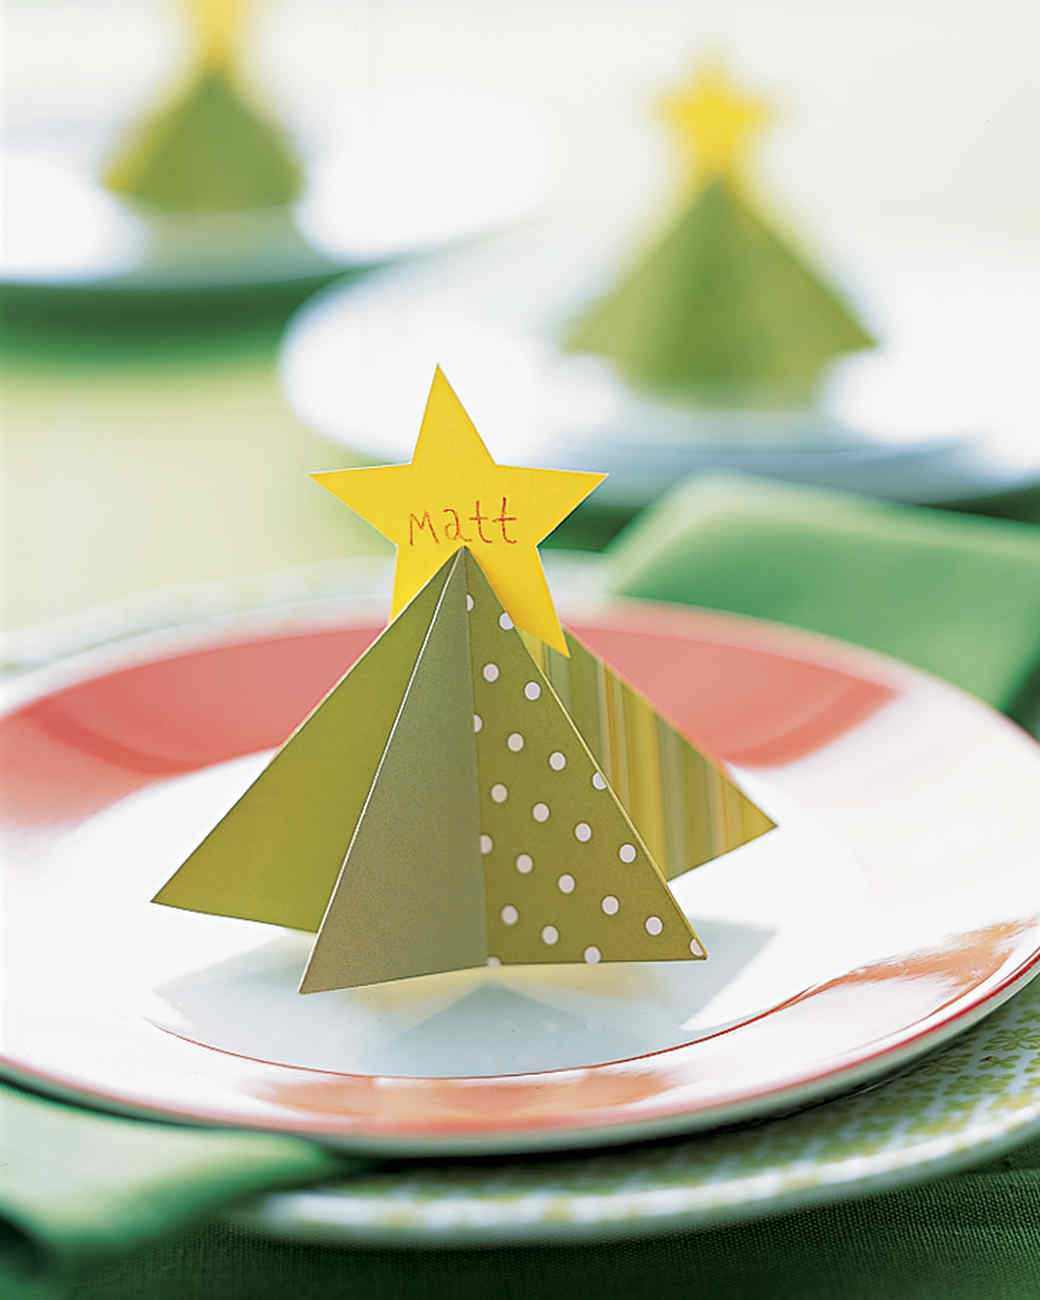 Free Table Card Cliparts, Download Free Clip Art, Free Clip In Christmas Table Place Cards Template